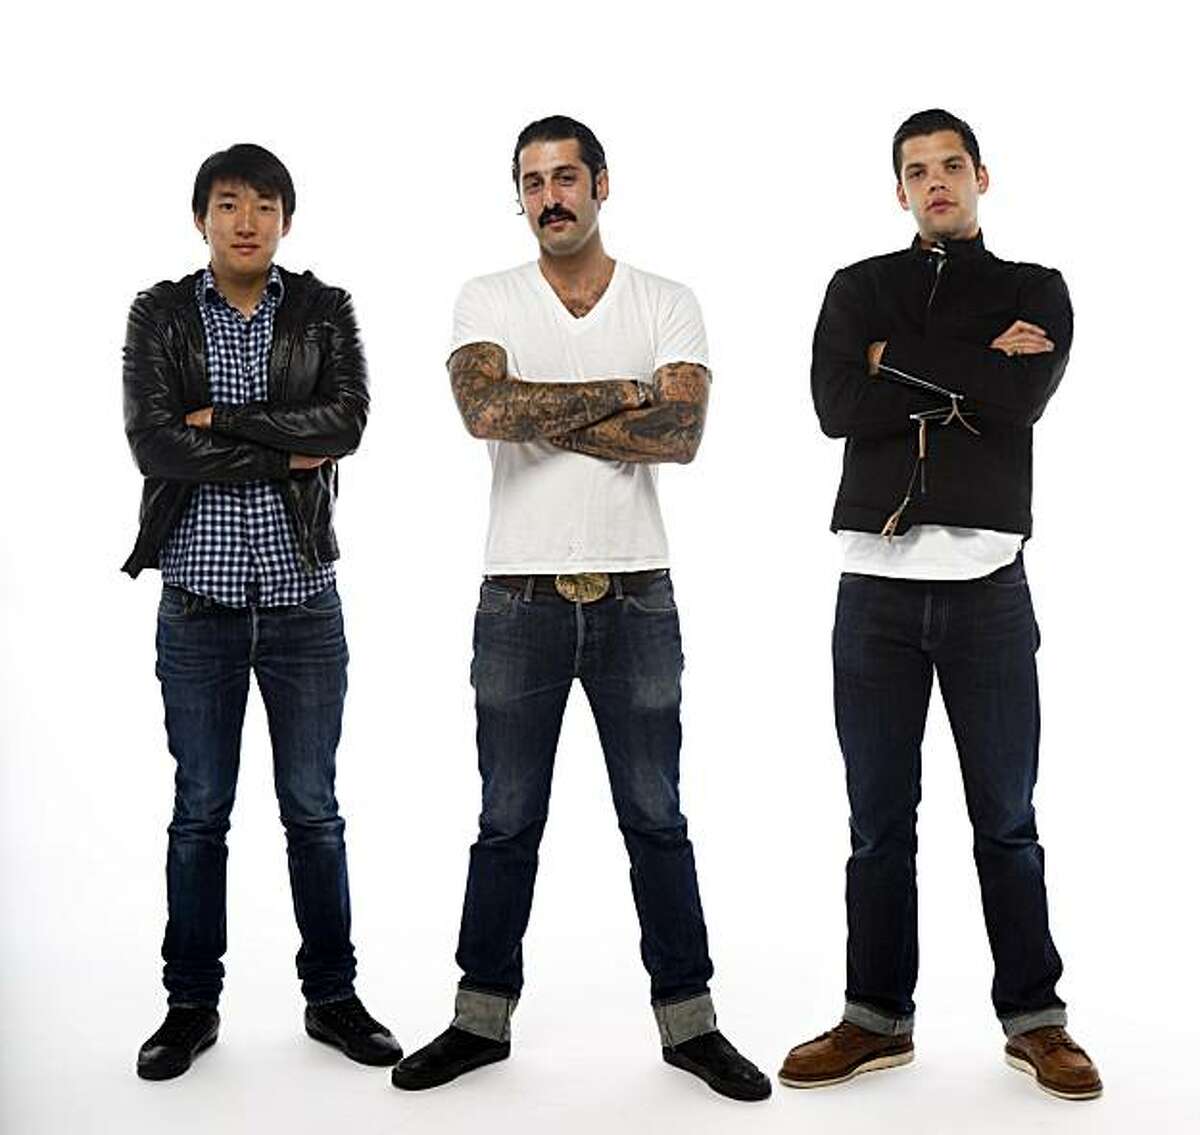 Bobby Yuen, left, Josh Harris, and Landon Eber pose for a photomontage in San Francisco, Calif. on Wednesday, June 9,2010.